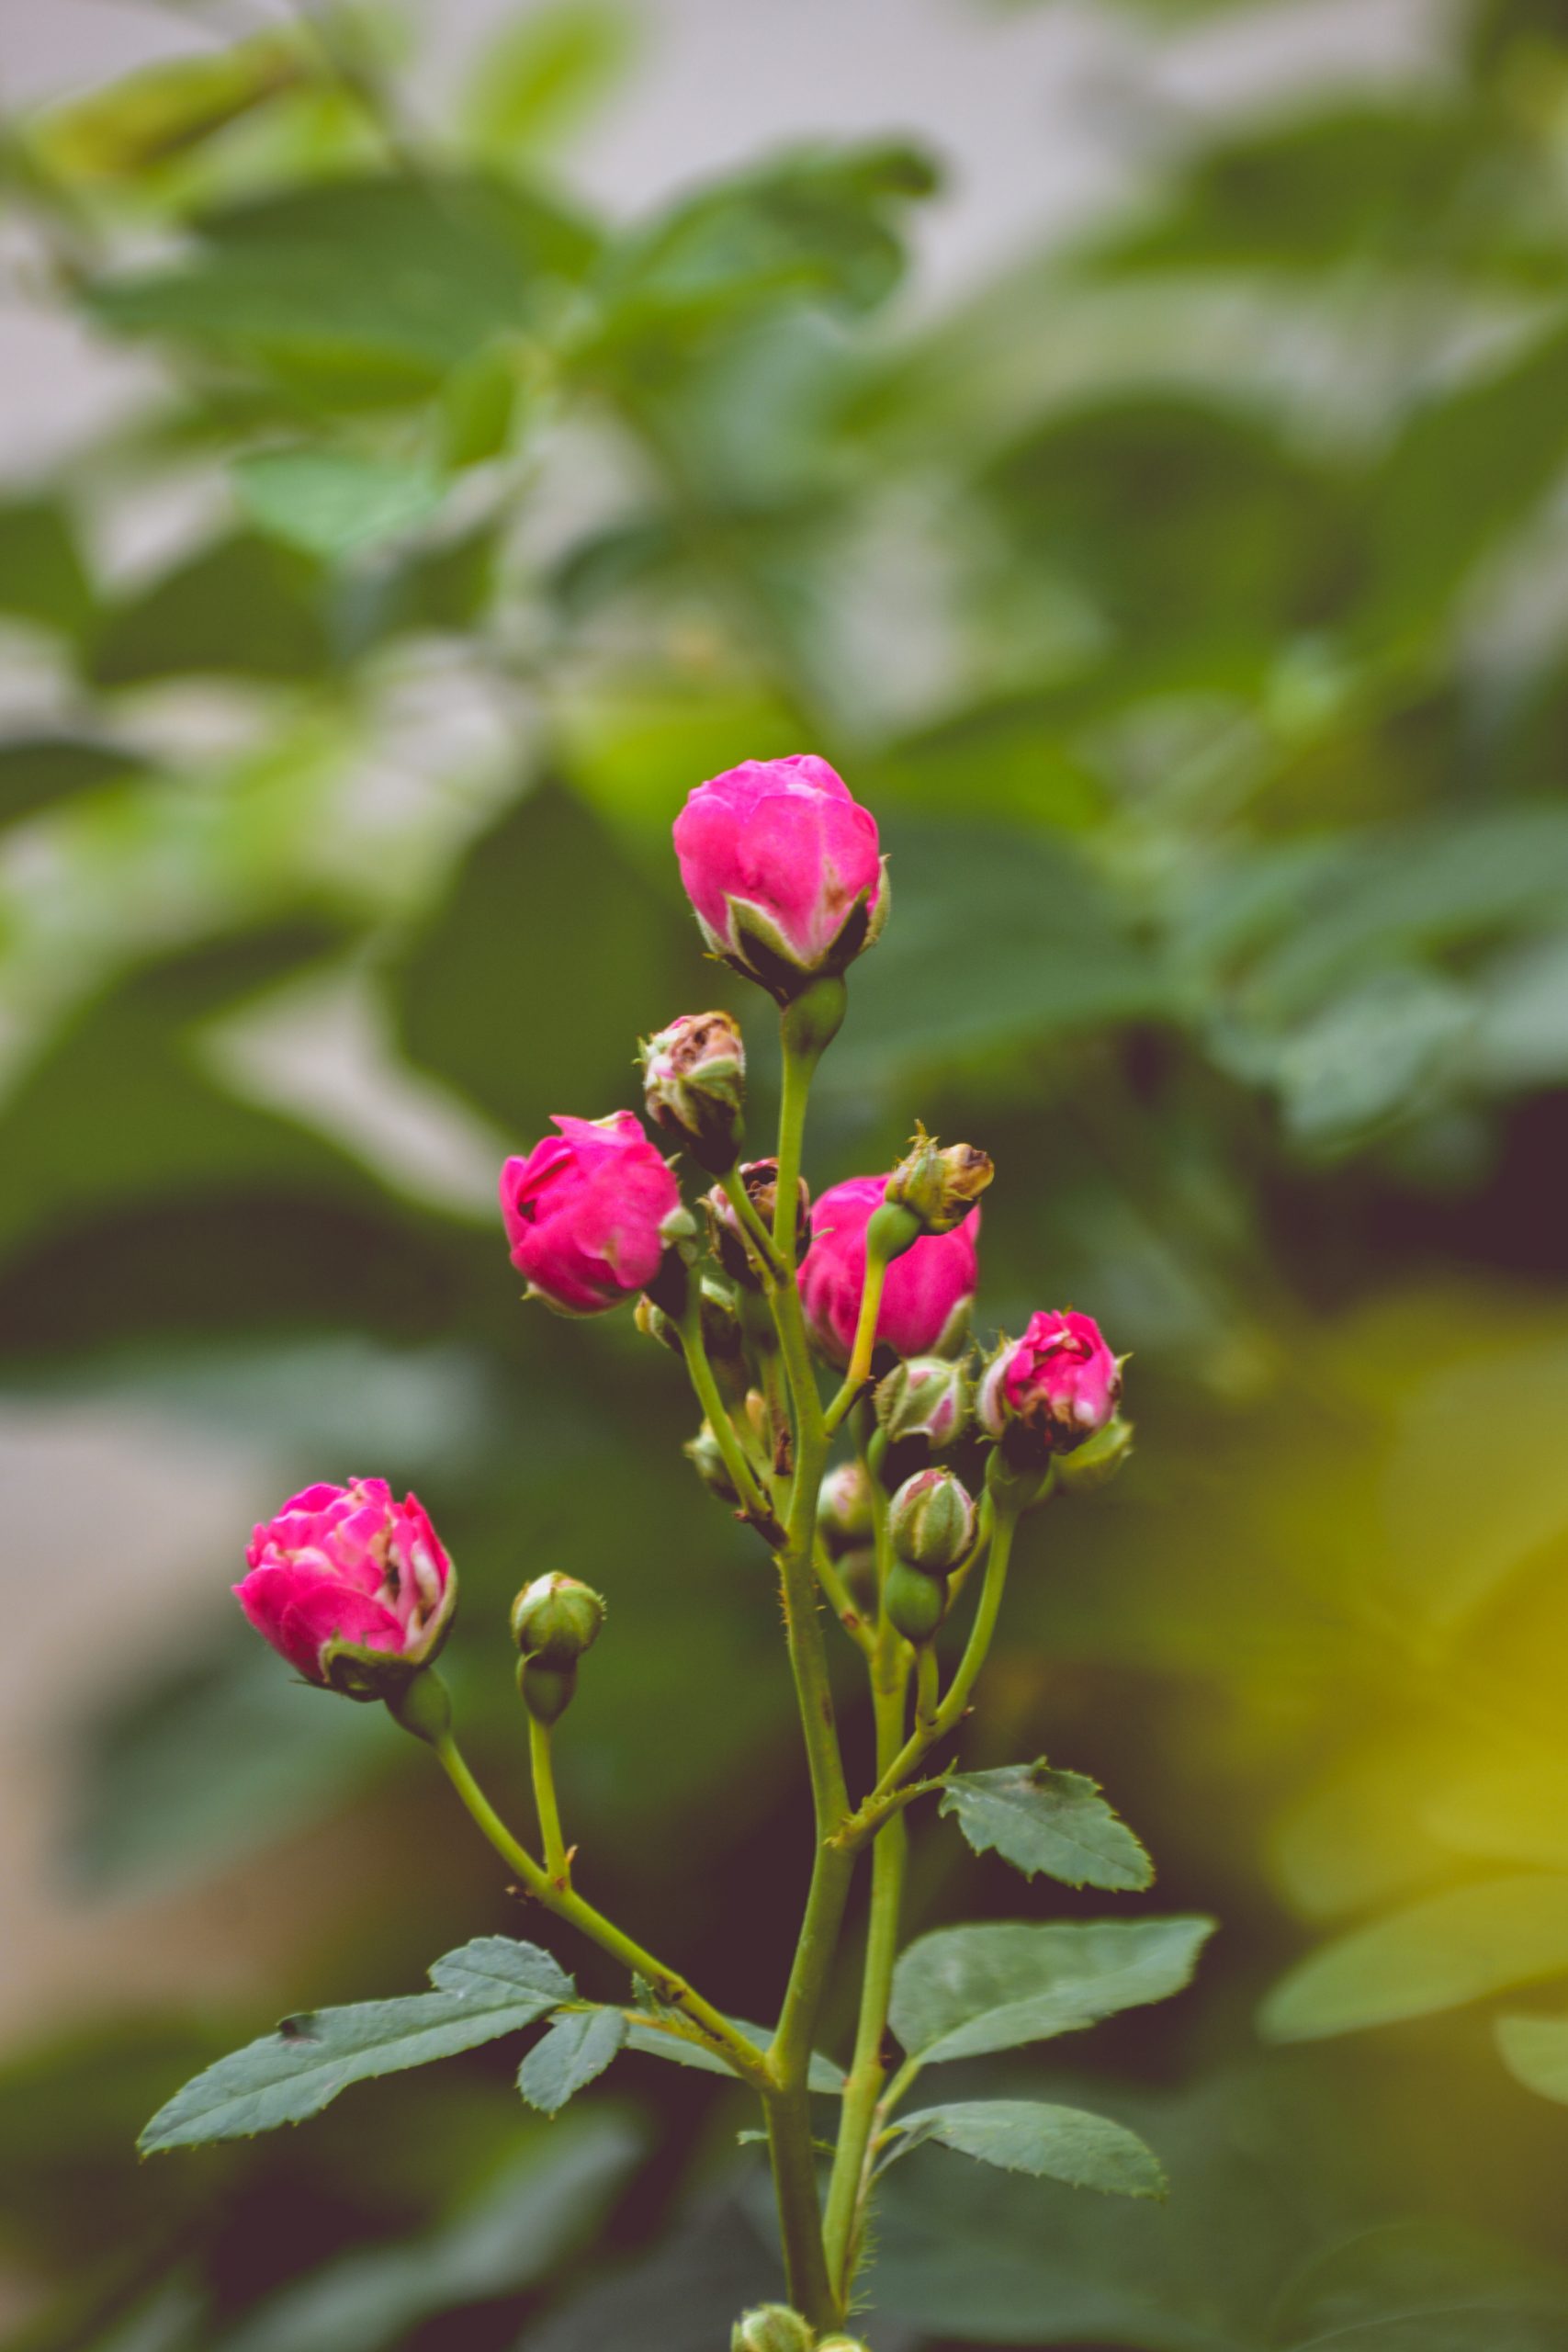 Little rose buds on blurred green background